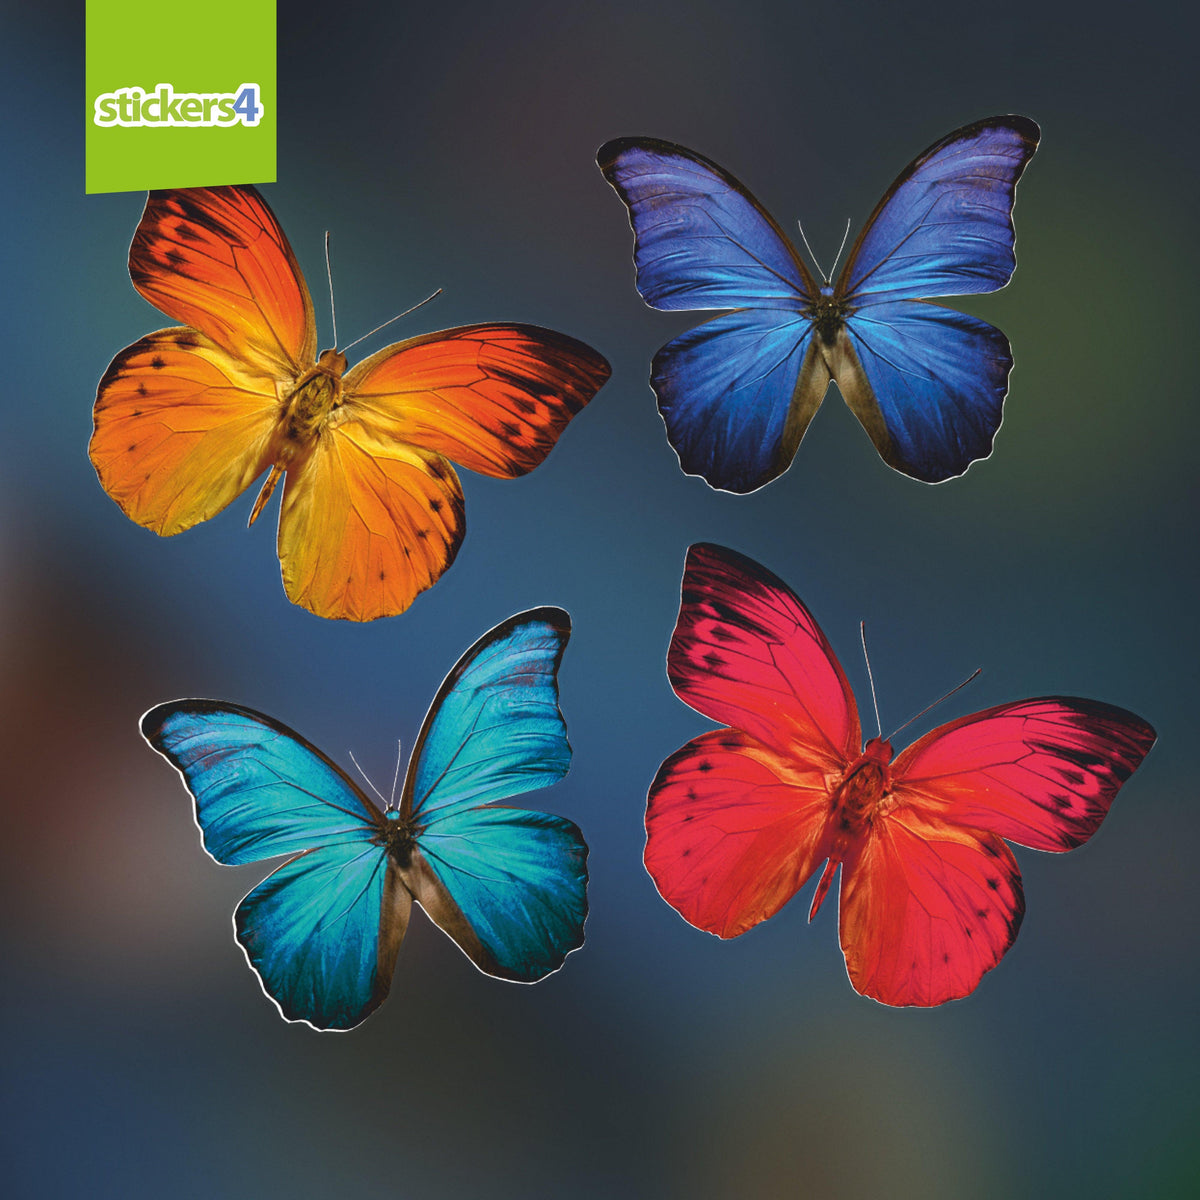 Large Colourful Butterfly Static Cling Window Stickers Decorative Bird Strike Prevention